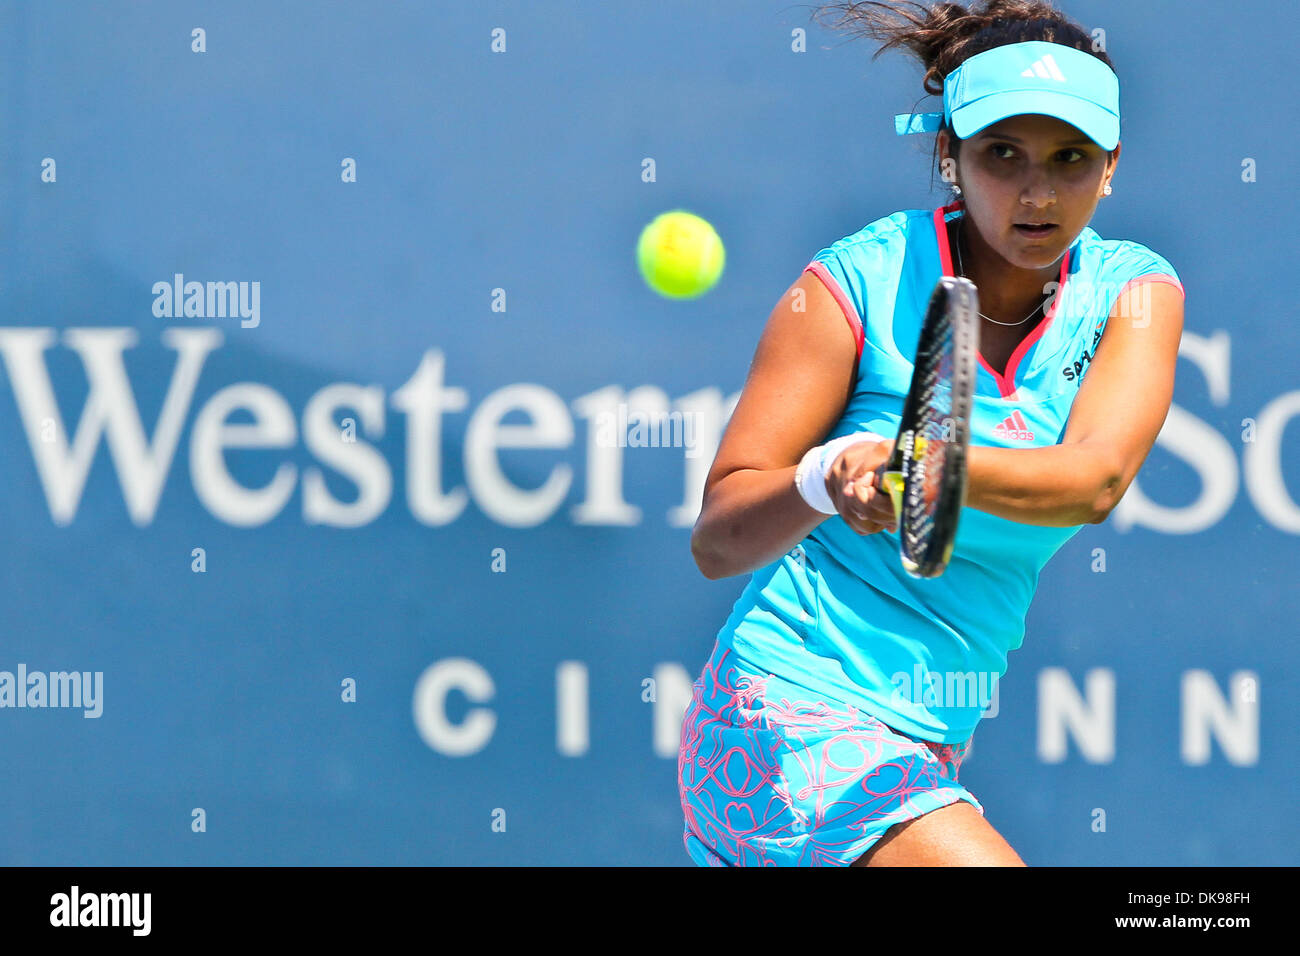 Aug. 13, 2011 - Cincinnati, Ohio, U.S - Sania Mirza (IND) in action during her match at the W&S Open being played at the Lindner Family Tennis Center in Cincinnati, OH. Mirza defeated King 76(4) 26 76(5) (Credit Image: Â© John Longo/Southcreek Global/ZUMAPRESS.com) Stock Photo